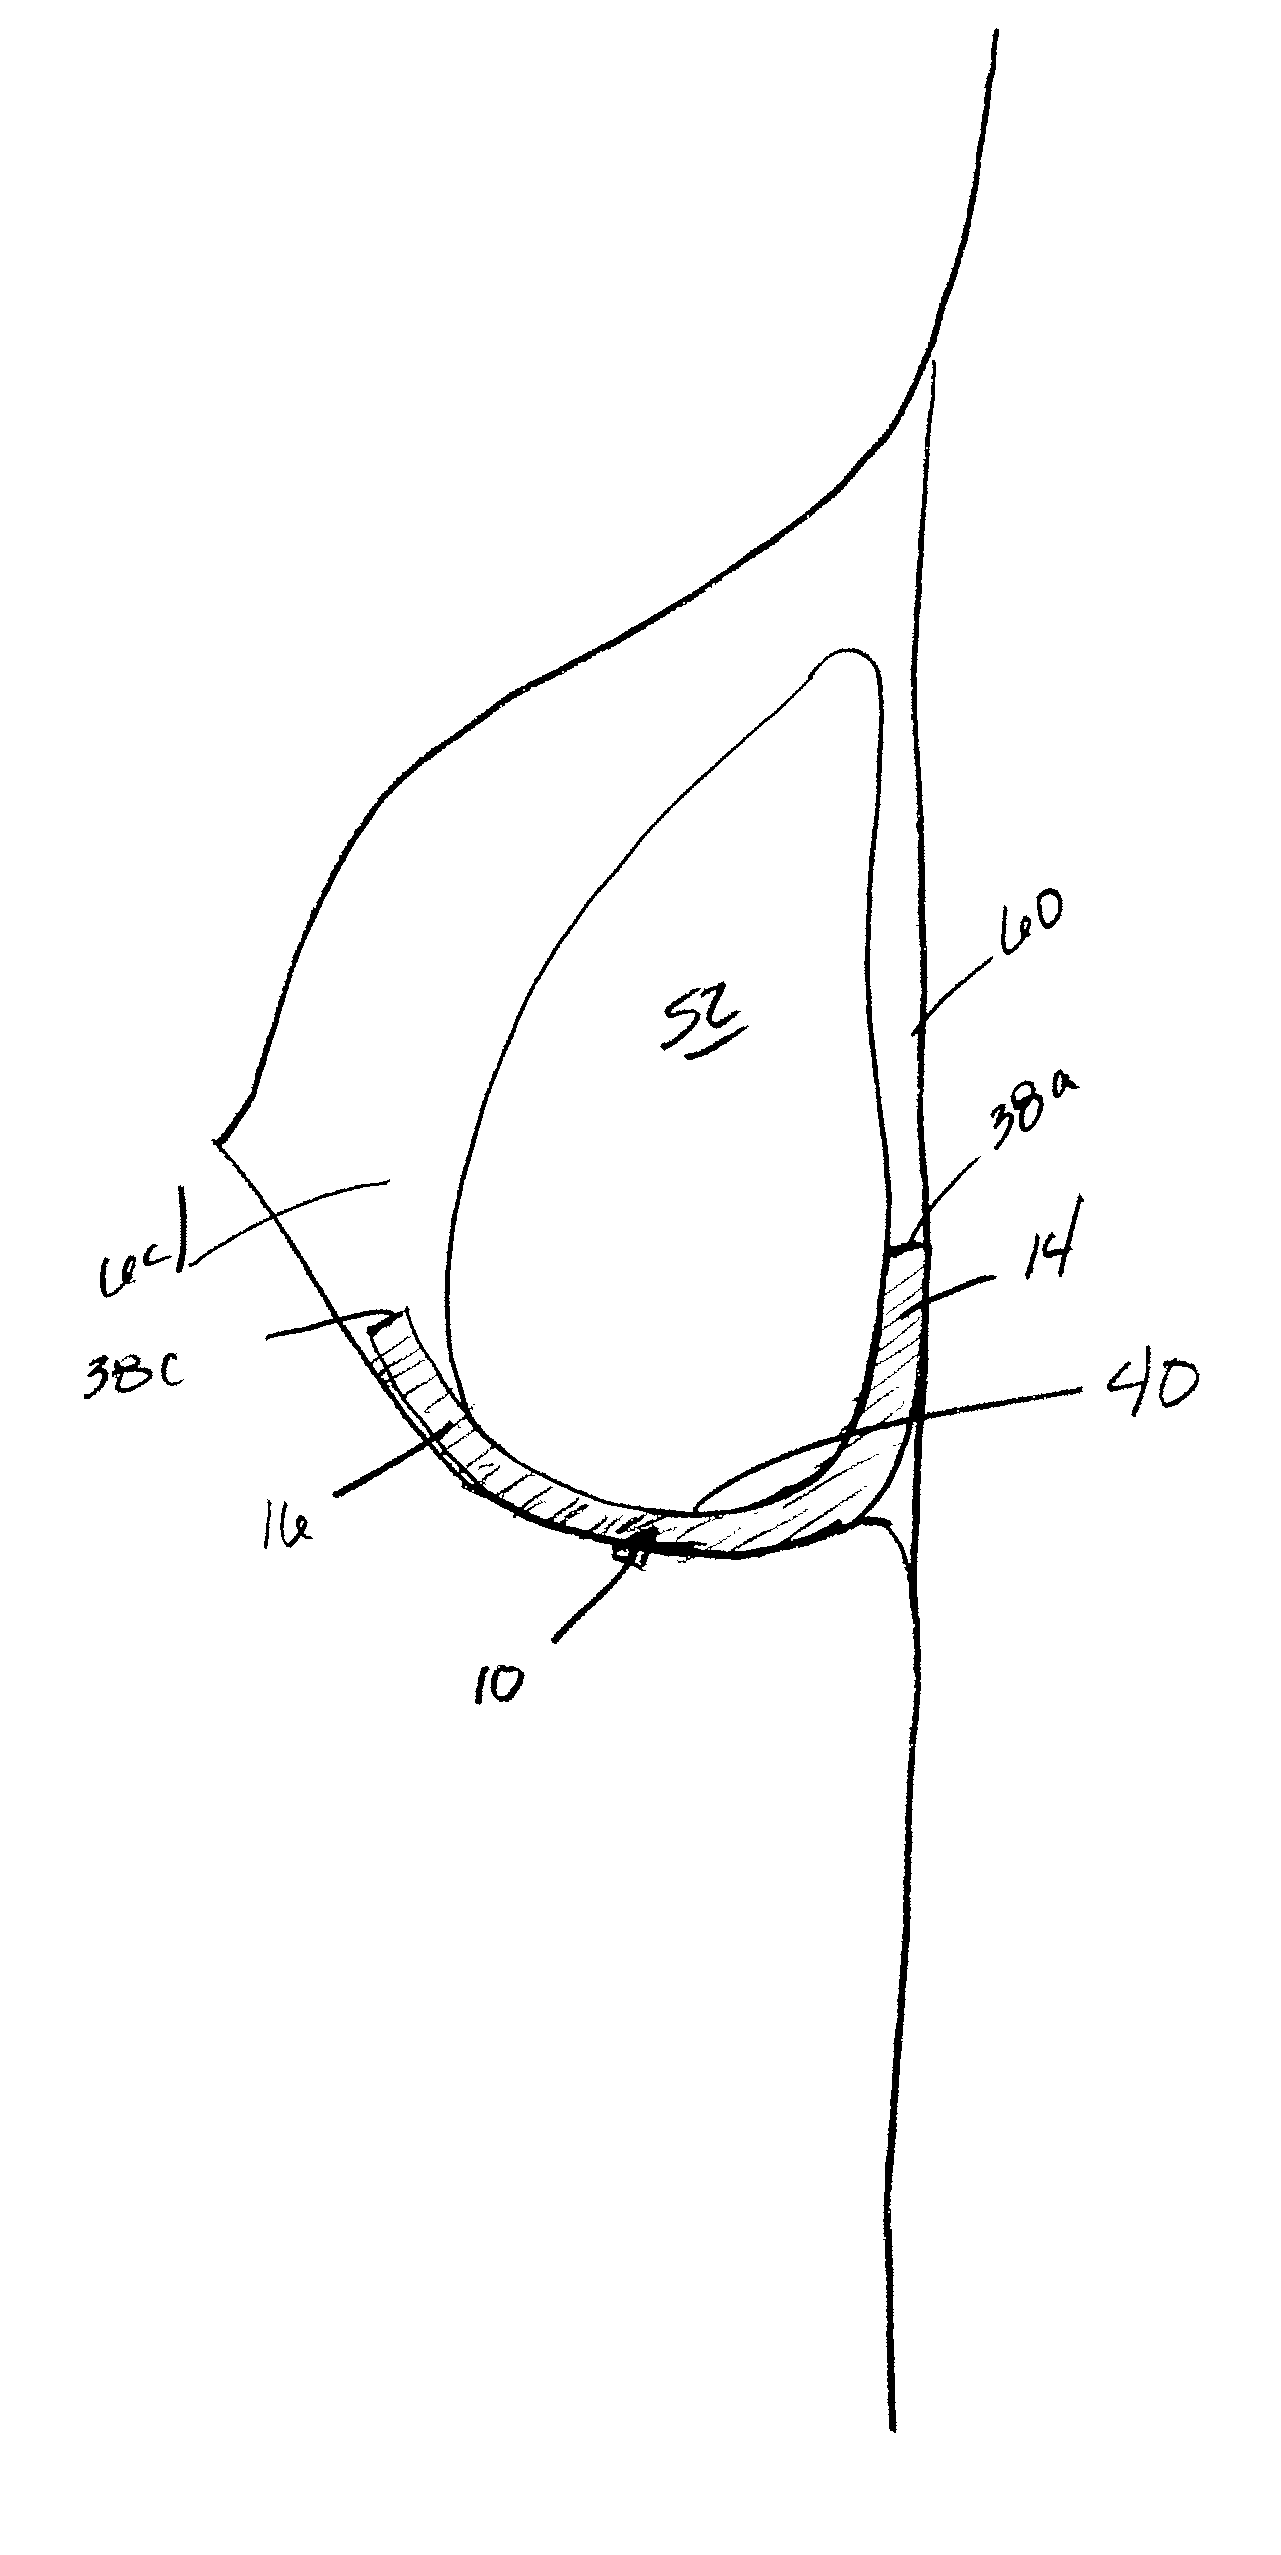 Implantable prosthesis for positioning and supporting a breast implant